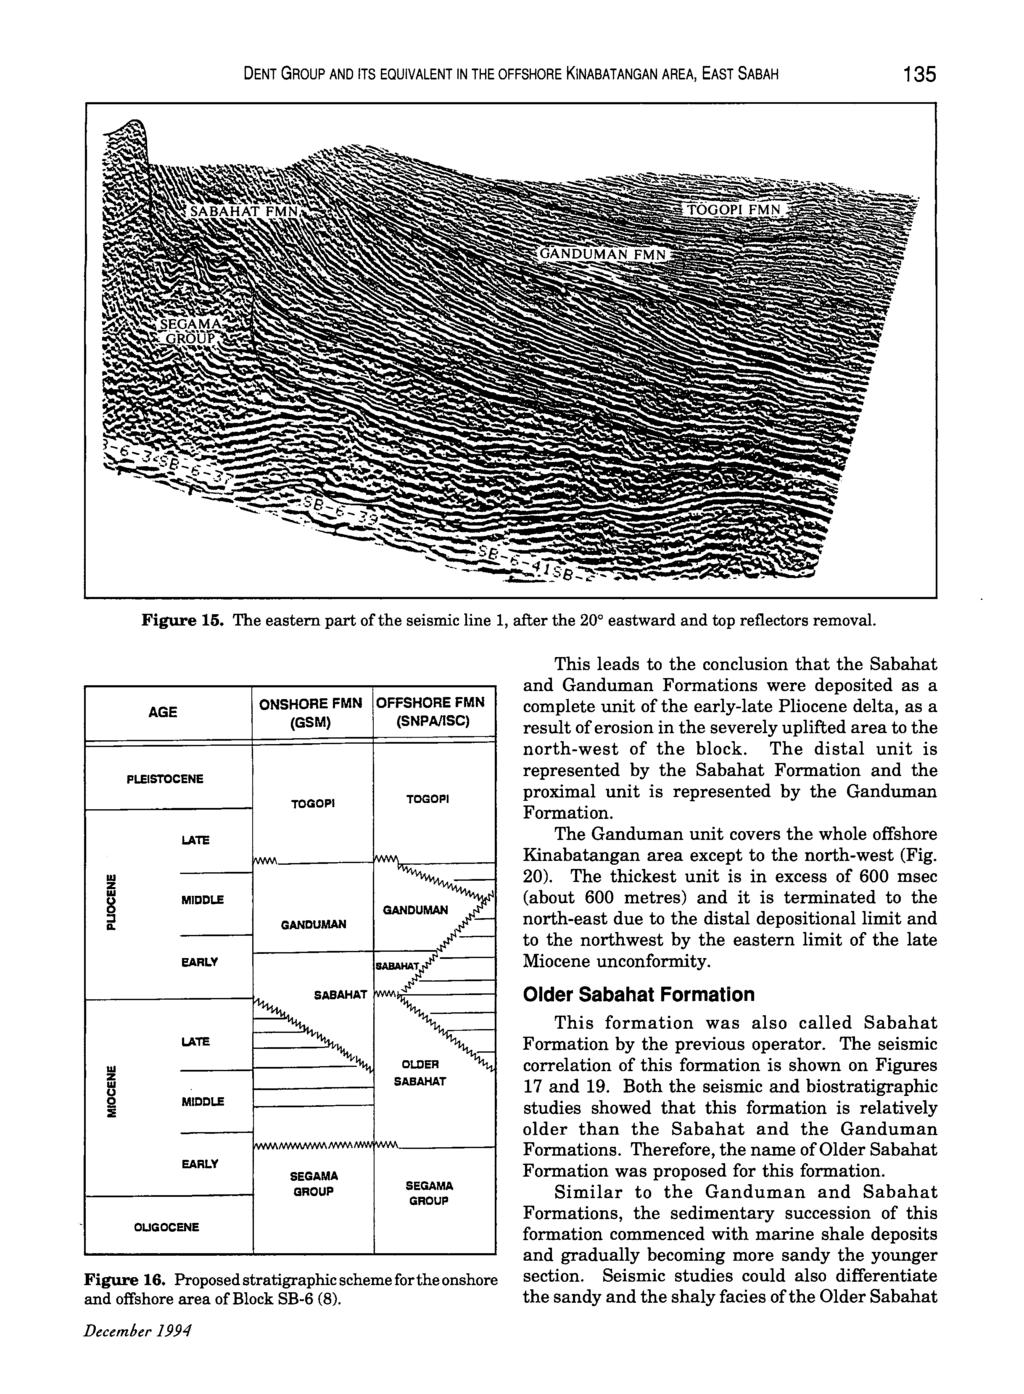 DENT GROUP AND ITS EQUIVALENT IN THE OFFSHORE KINABATANGAN AREA, EAST SABAH 135 Figure 15. The eastern part of the seismic line 1, after the 20 eastward and top reflectors removal.